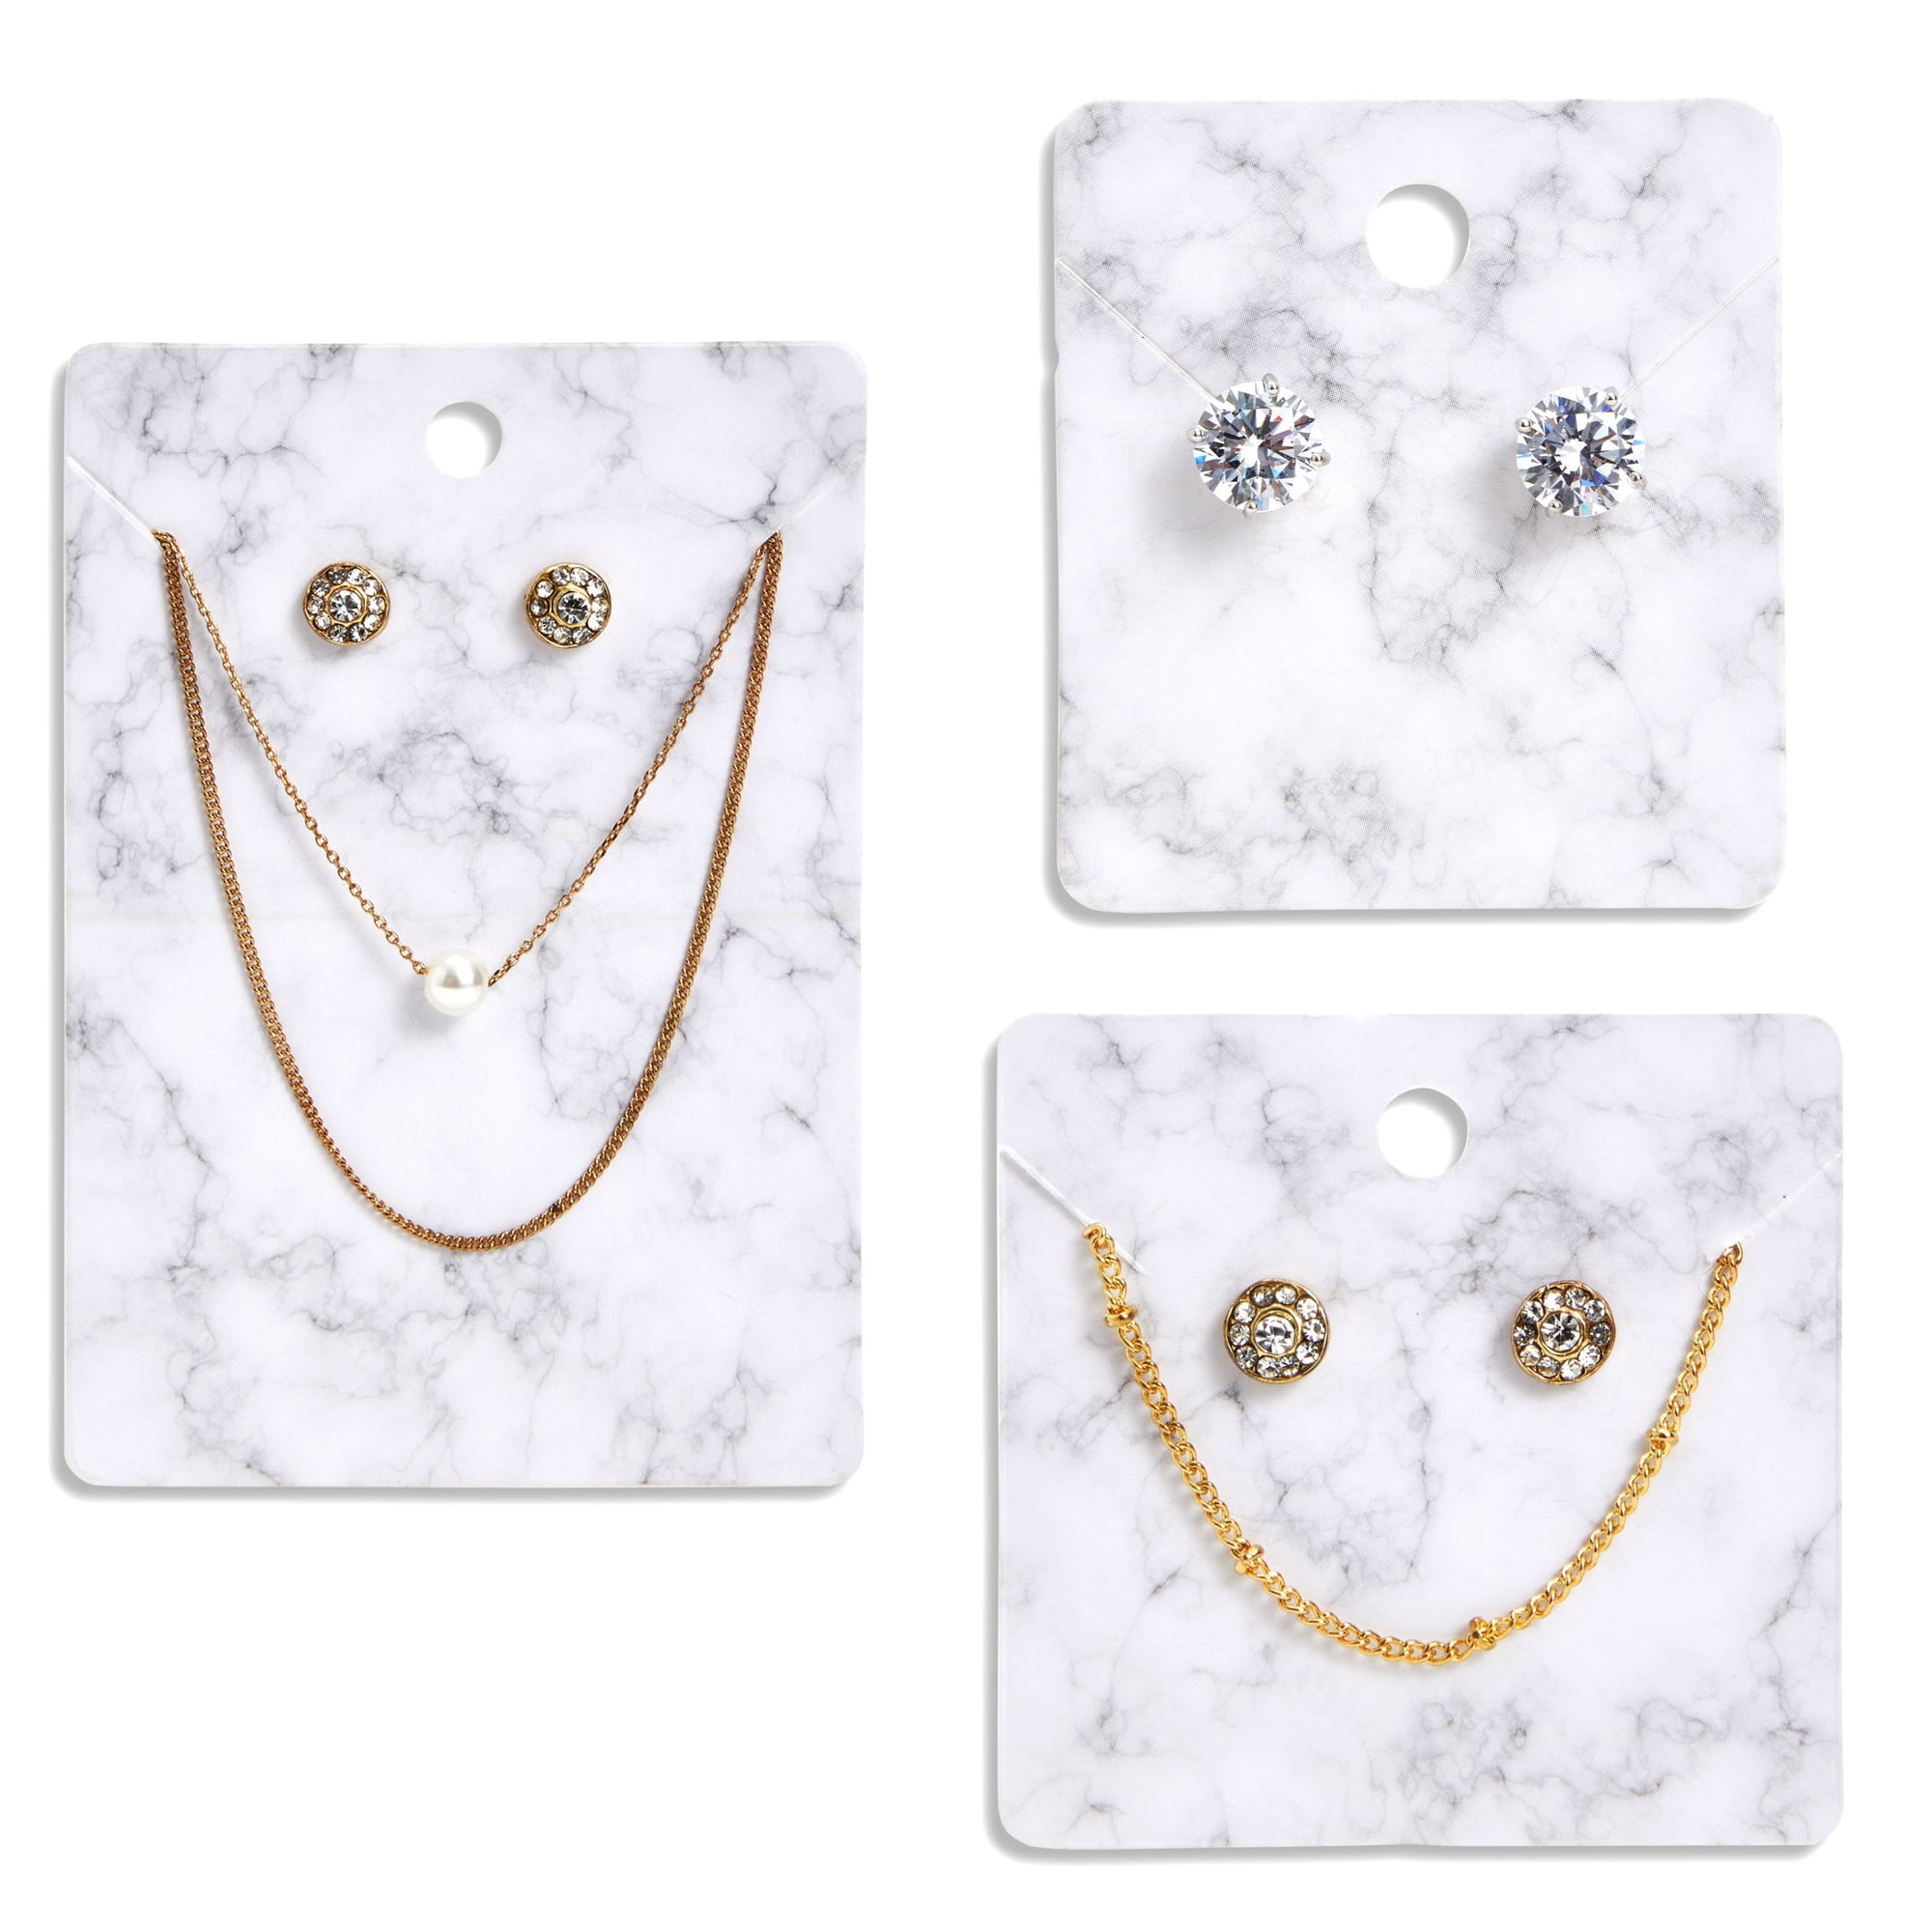 300x Marble Jewelry Display Cards Holder for Earring, Necklace Selling, 2 x  2 In